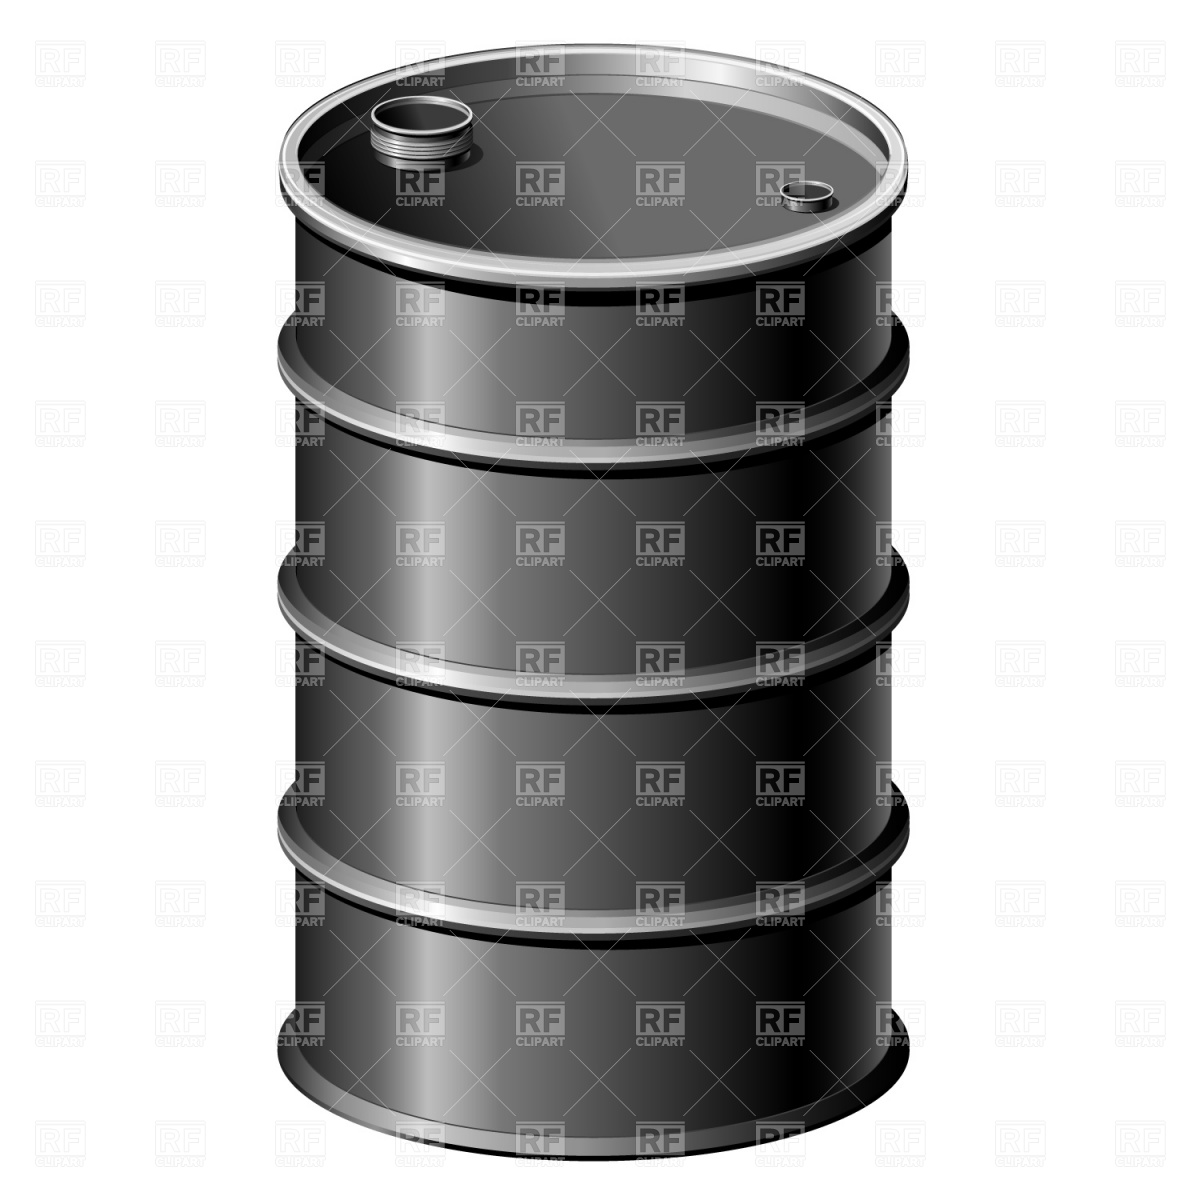 Oil Barrel 973 Download Royalty Free Vector Clipart  Eps 